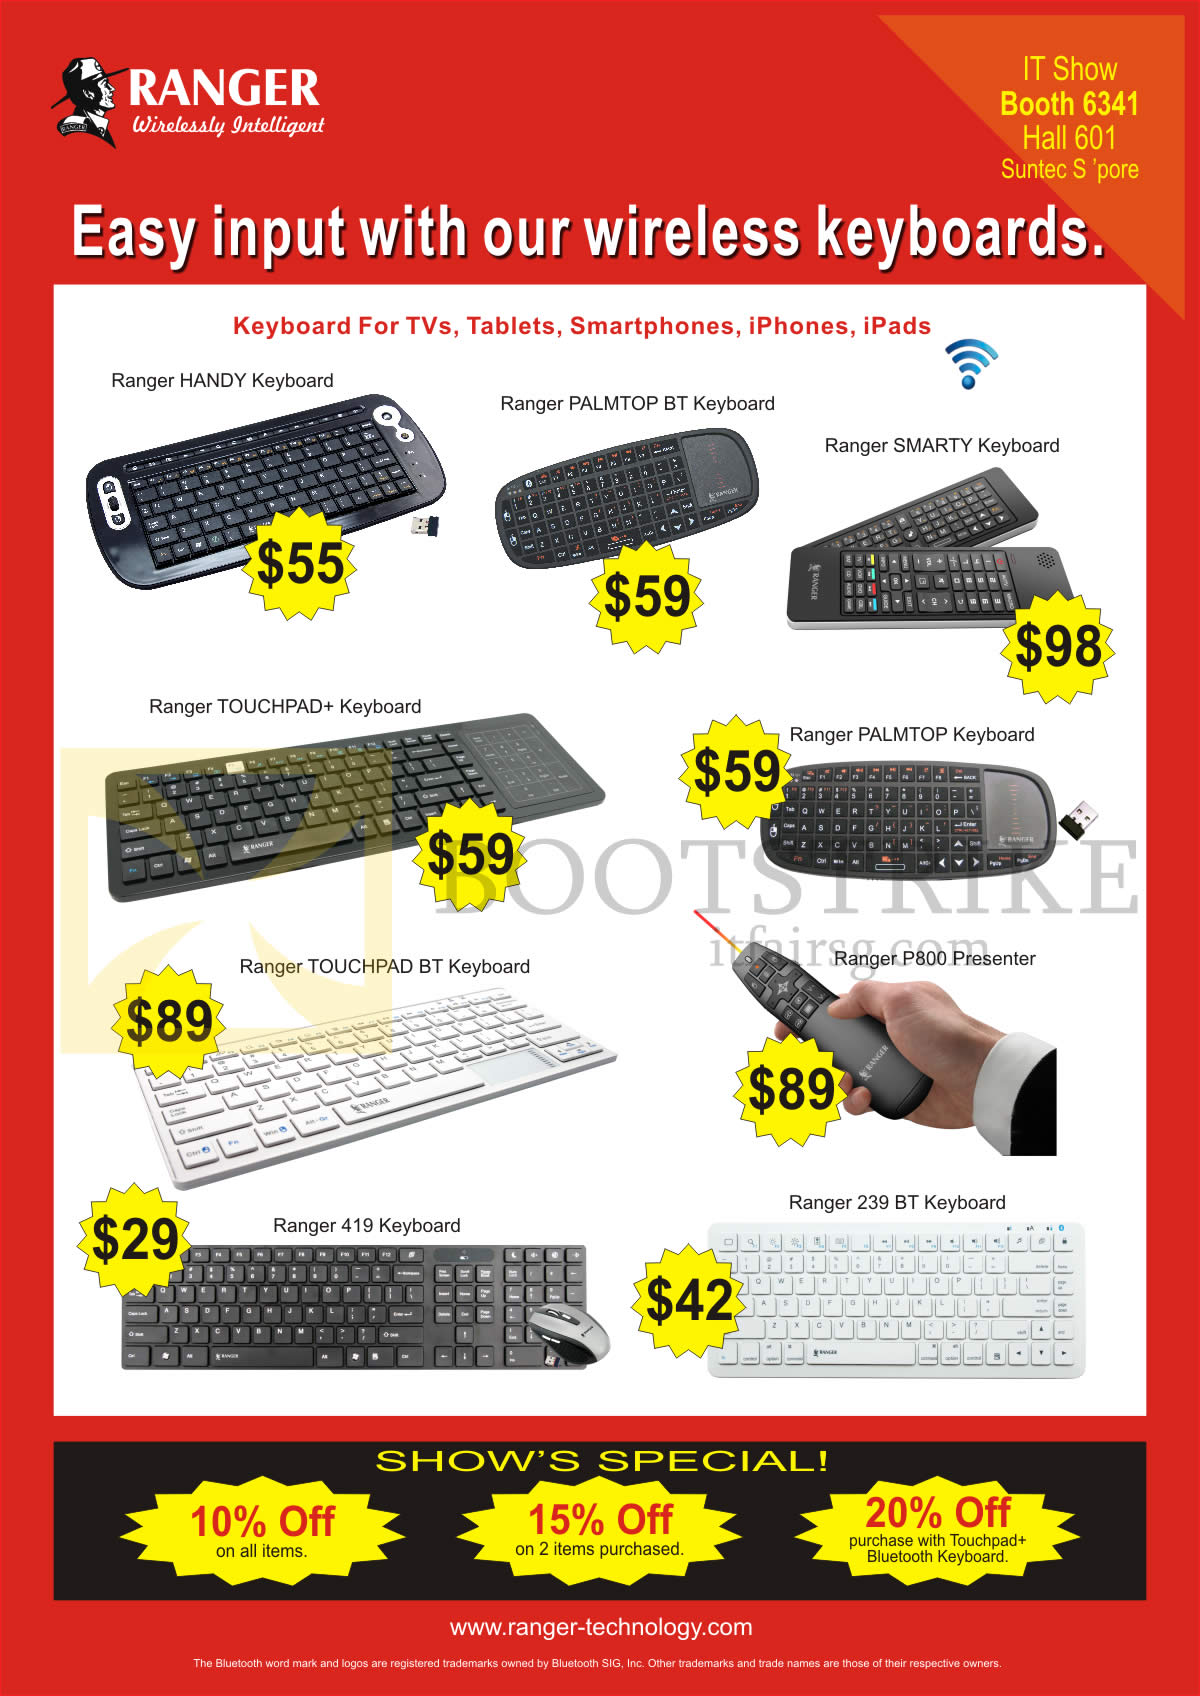 IT SHOW 2015 price list image brochure of Systems Tech Ranger Keyboards Bluetooth Handy, Palmtop BT, Smarty, Touchpad Plus, 419, 239BT, P800 Presenter